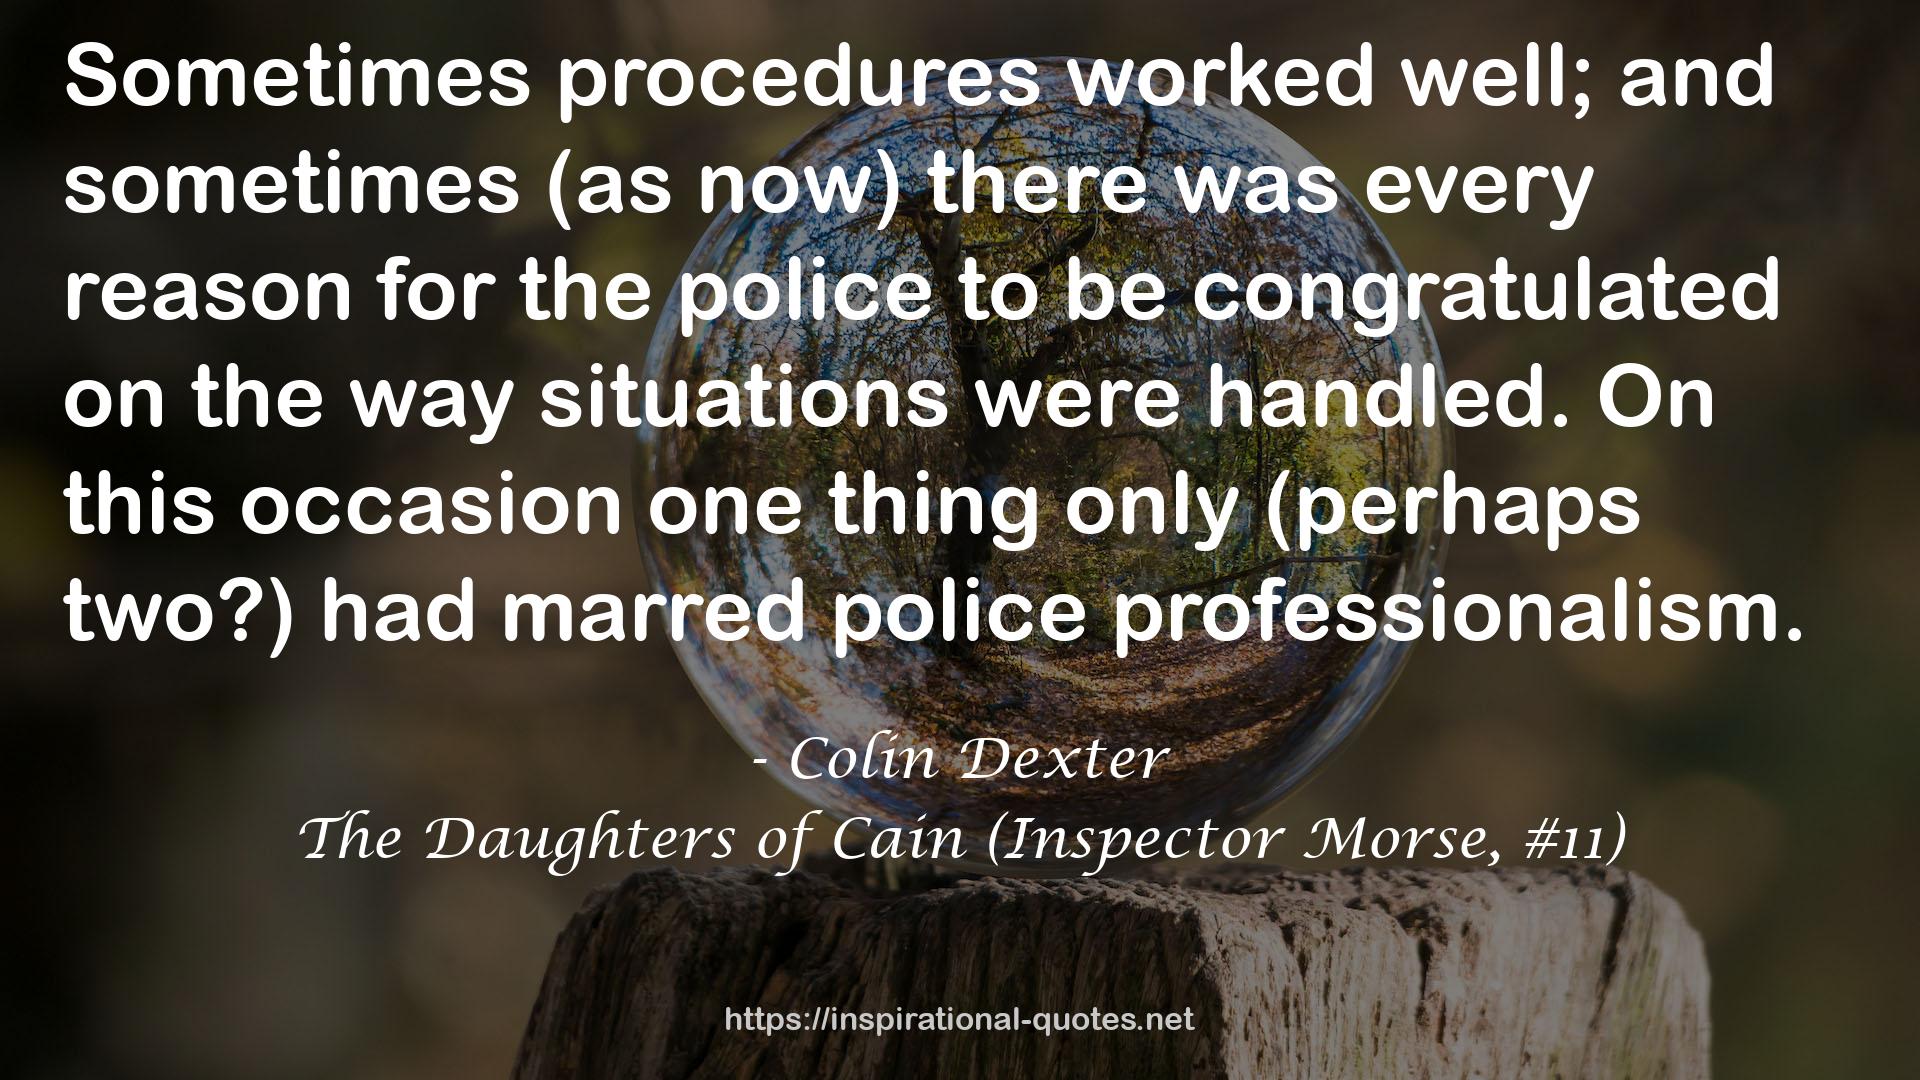 The Daughters of Cain (Inspector Morse, #11) QUOTES